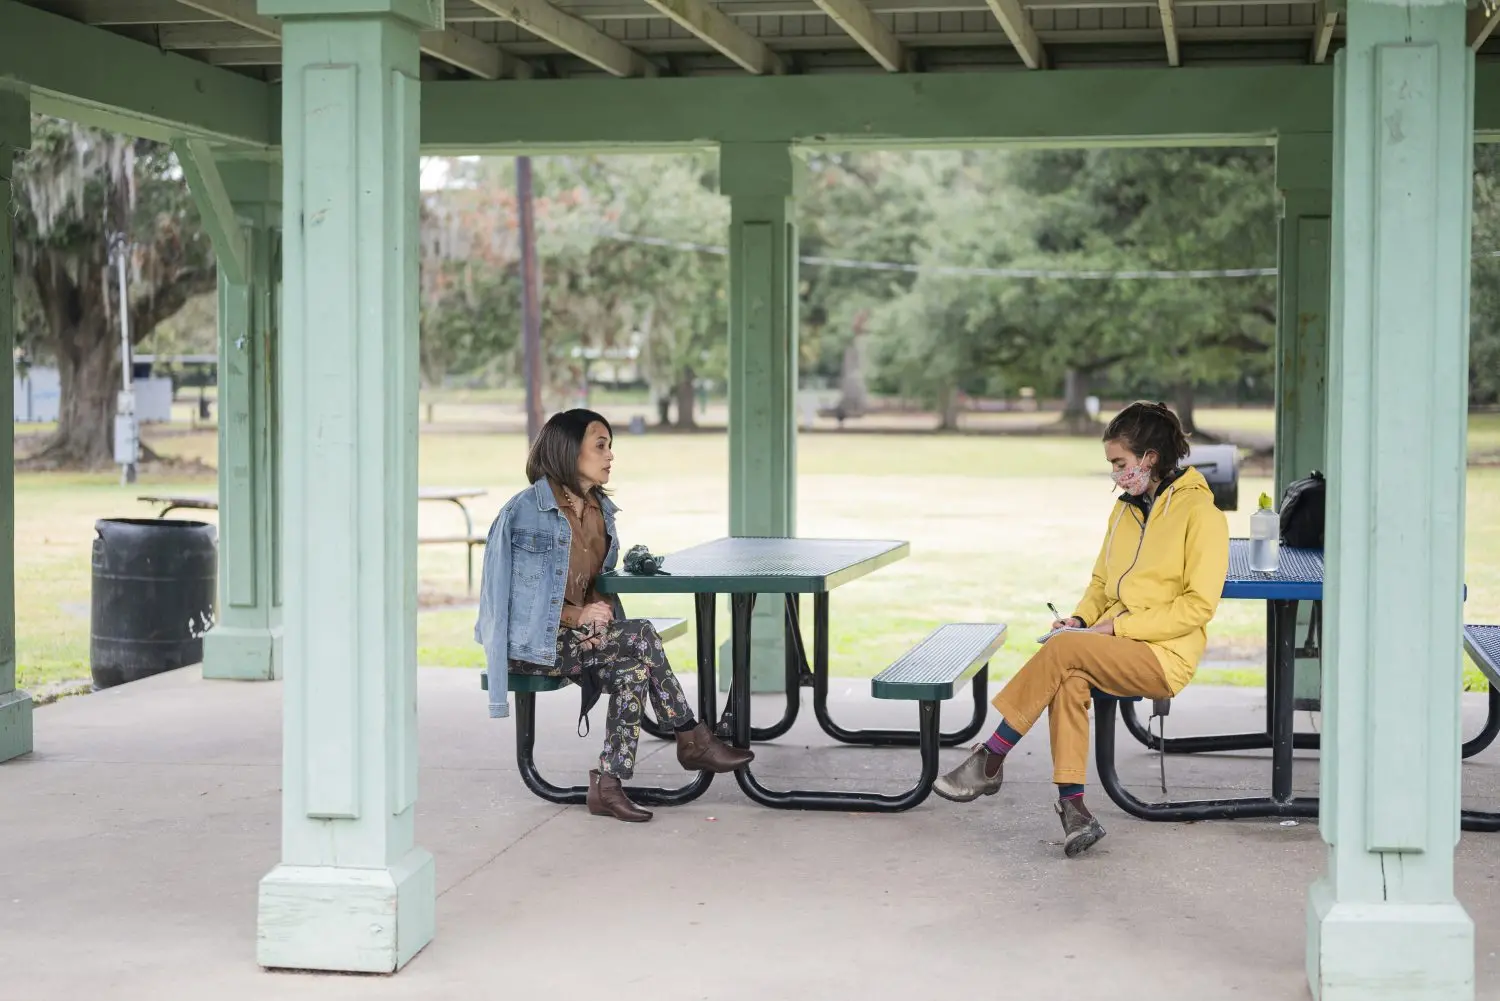 Two people sit socially distanced at picnic tables in a covered patio in a park.